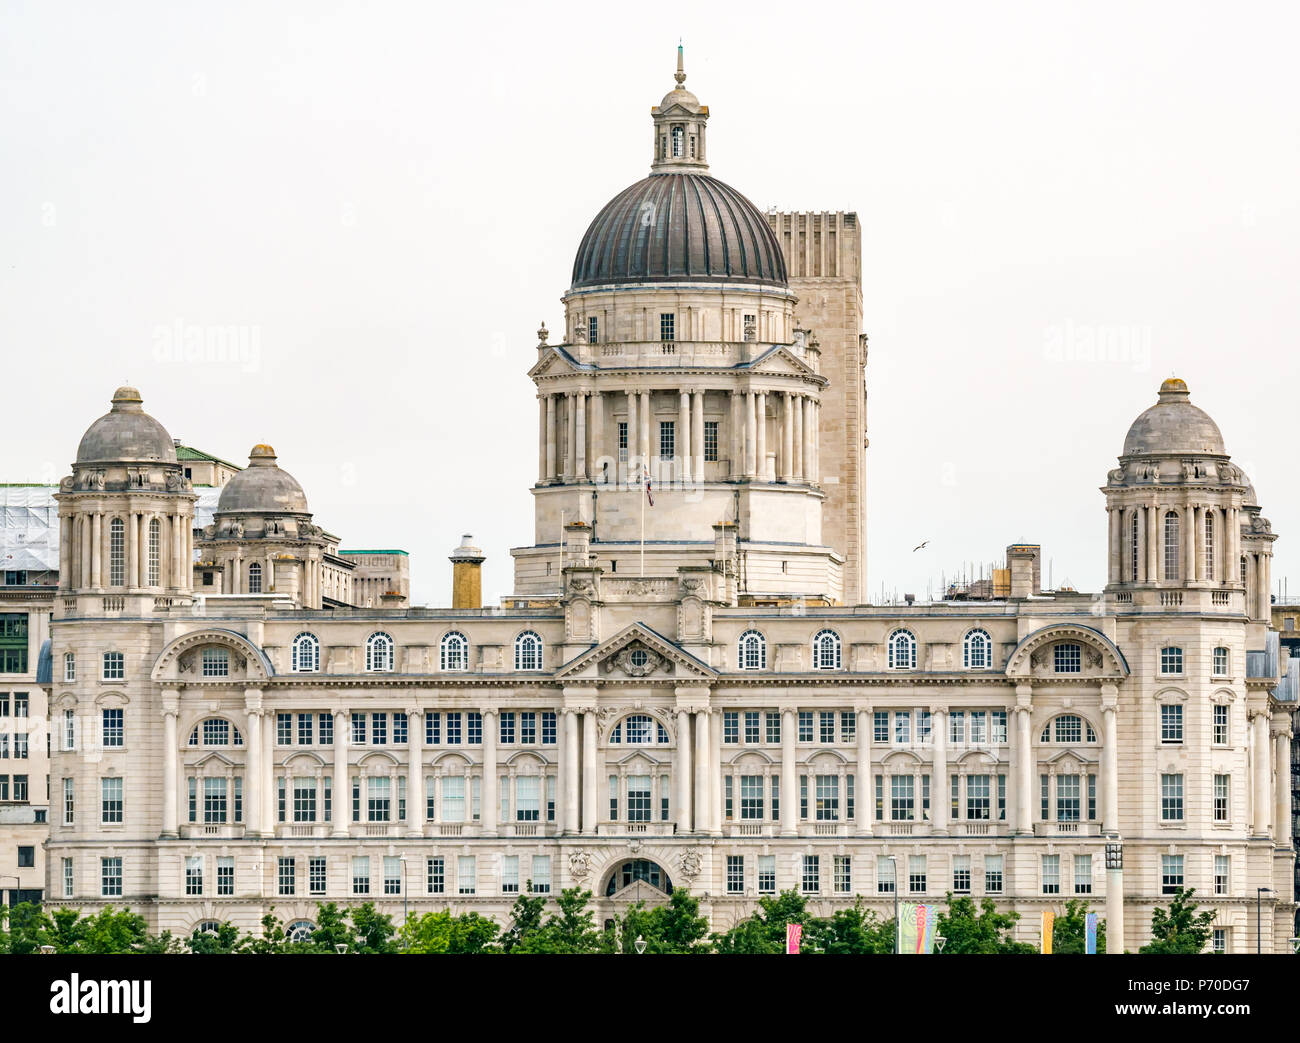 Domed grand Edwardian baroque style Port of Liverpool building, one of Three Graces, Pier Head, Liverpool, England, UK Stock Photo